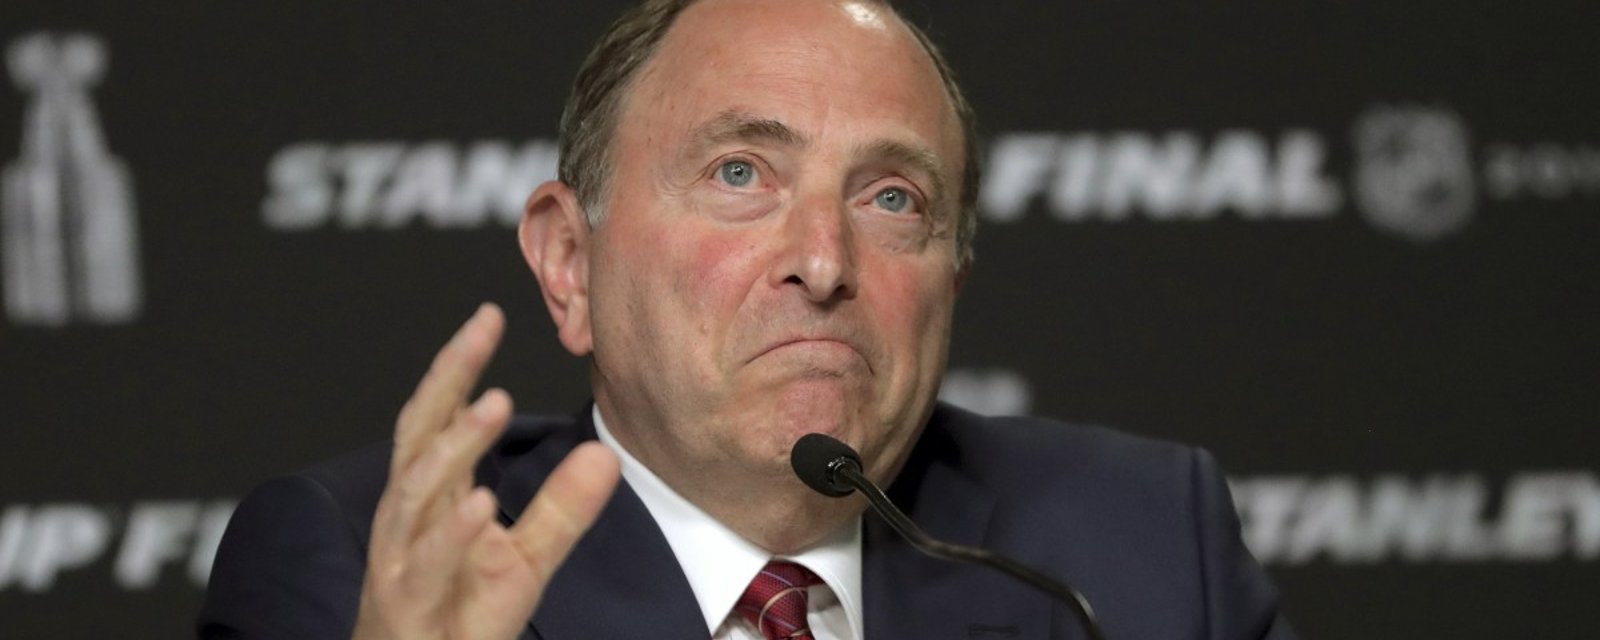 Rumor: 1 Canadian province putting the entire NHL season in jeopardy.